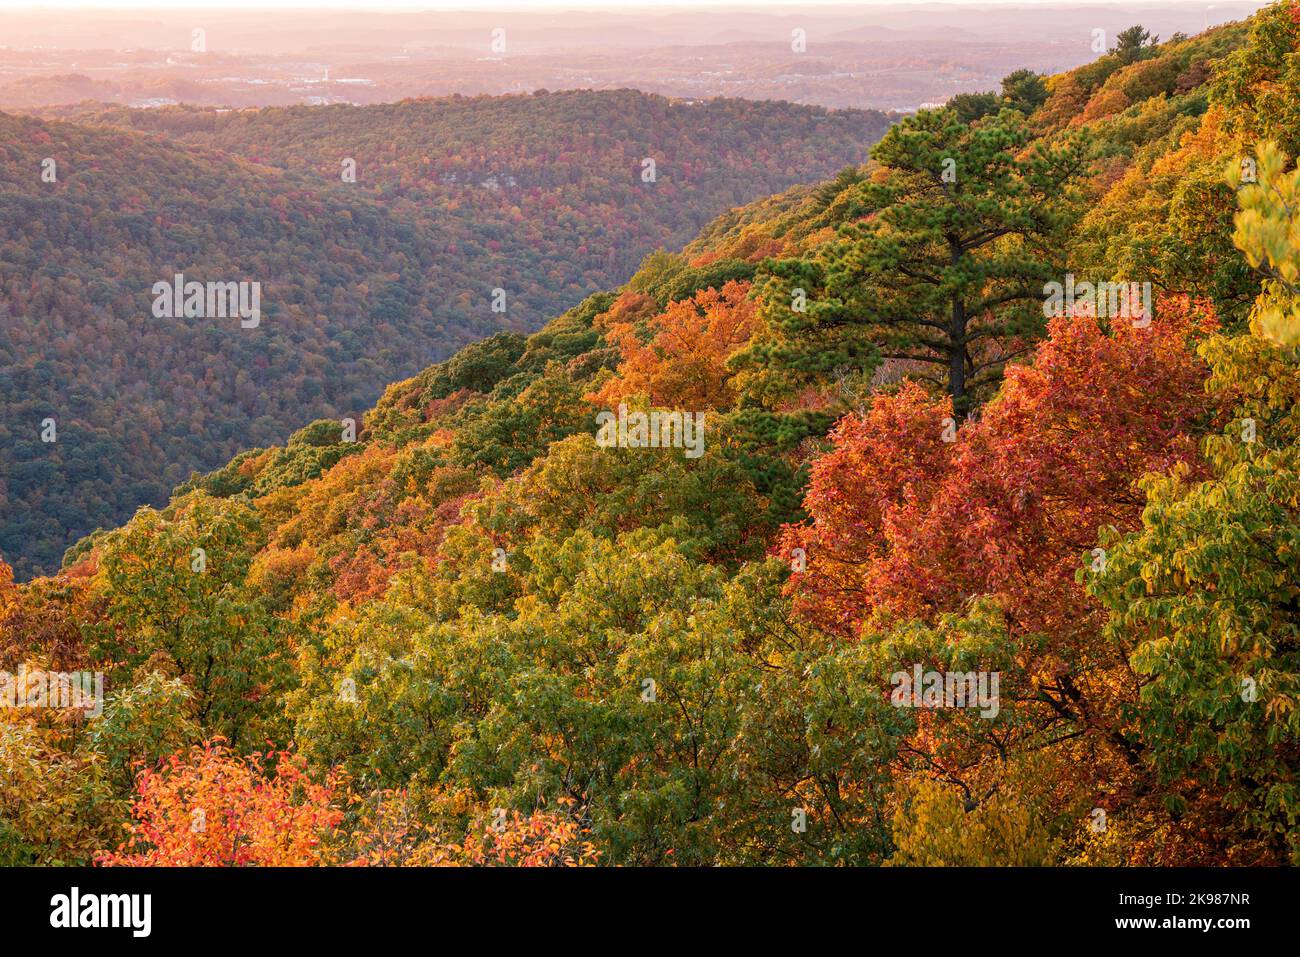 Setting sun sheds warm light illuminating the fall colors of the trees in Coopers Rock State Forest Stock Photo